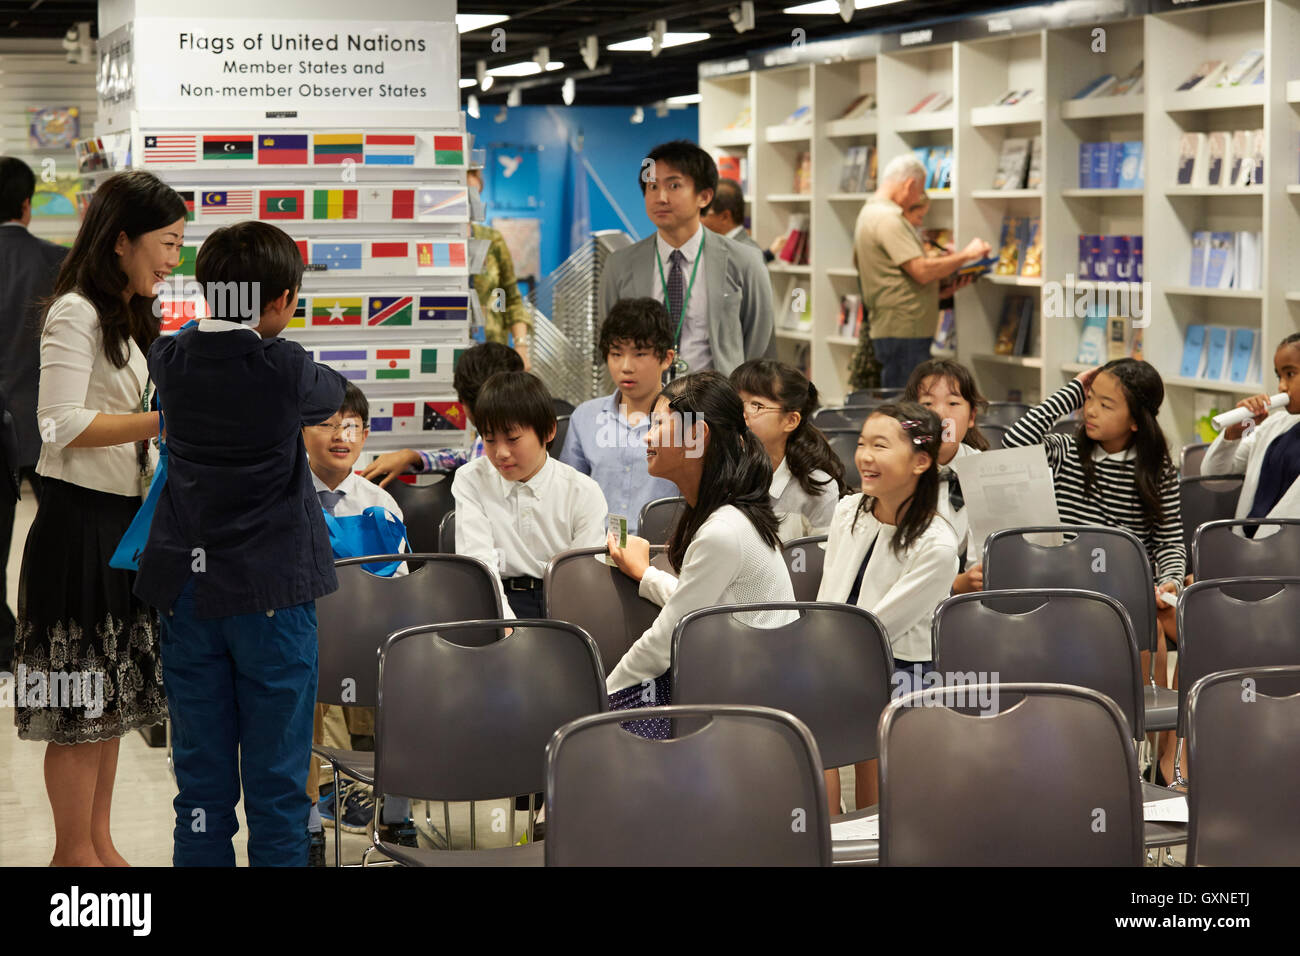 Author Seiko Takase, signs books and greeted guest at the UN Book Store on the International Day of Peace. Seiko Takase shares with us her father Chiyoji Nakagawa project known as the “Peace Bell” on the 35th Anniversary of the International Day of Peace. Stock Photo